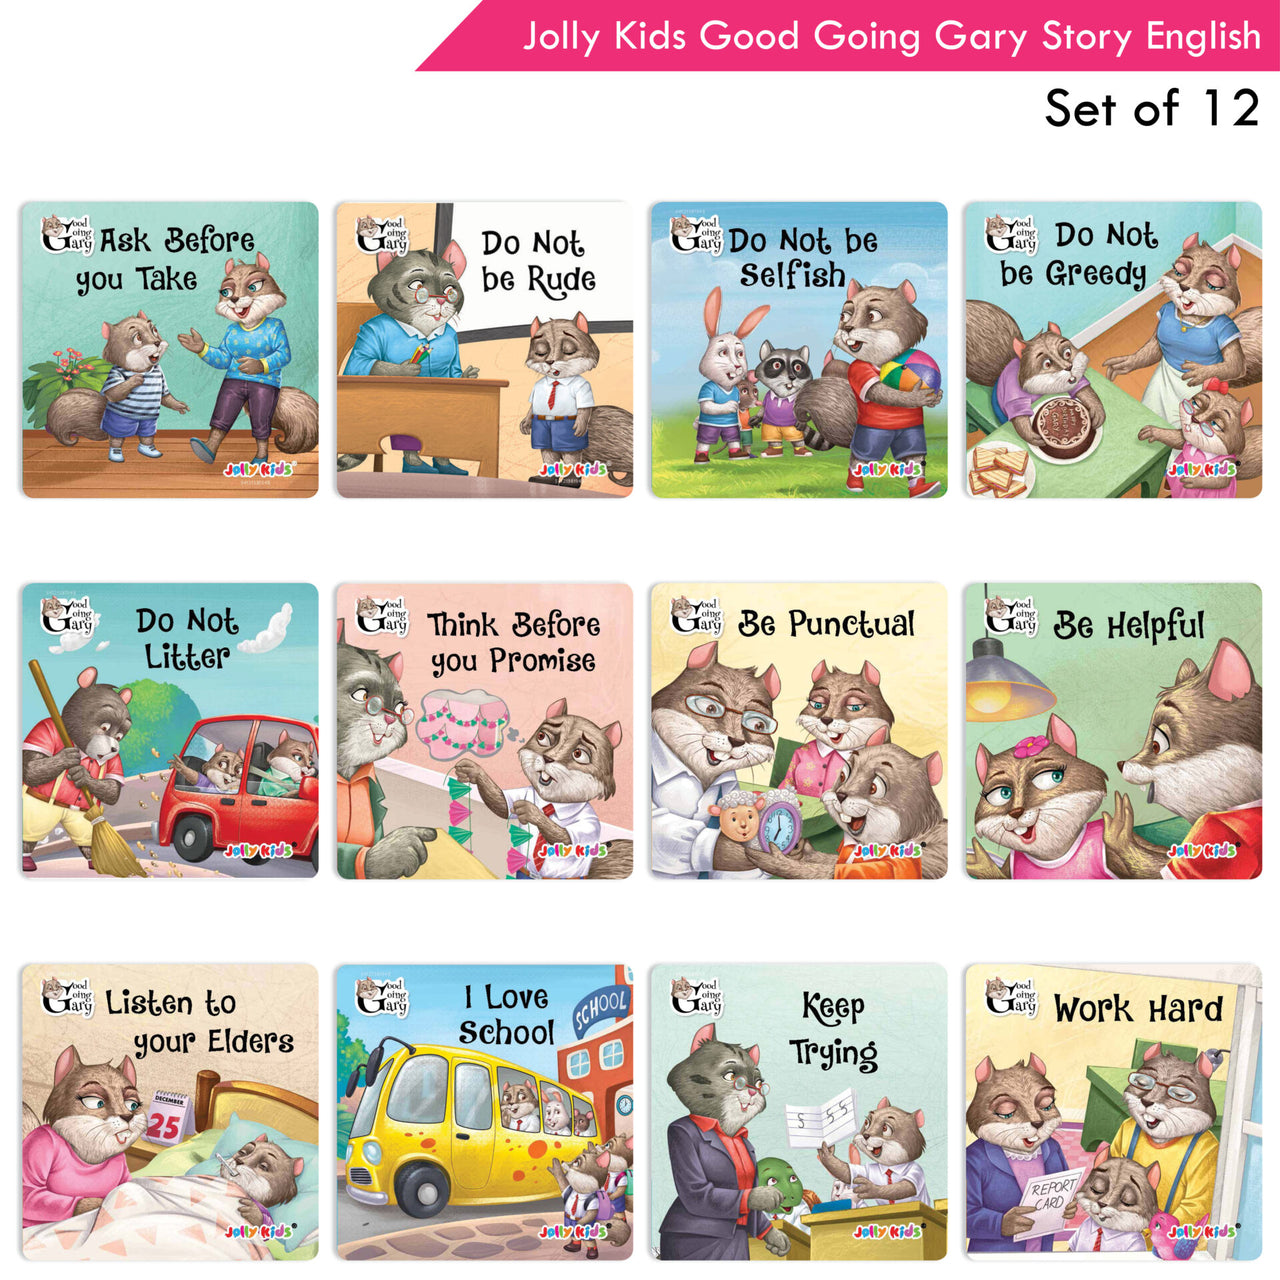 Jolly Kids Good Going Gary Character Building English Story Books for Kids| Set of 12| Character Based Children Story Books| Ages 3 - 8 Years - Distacart